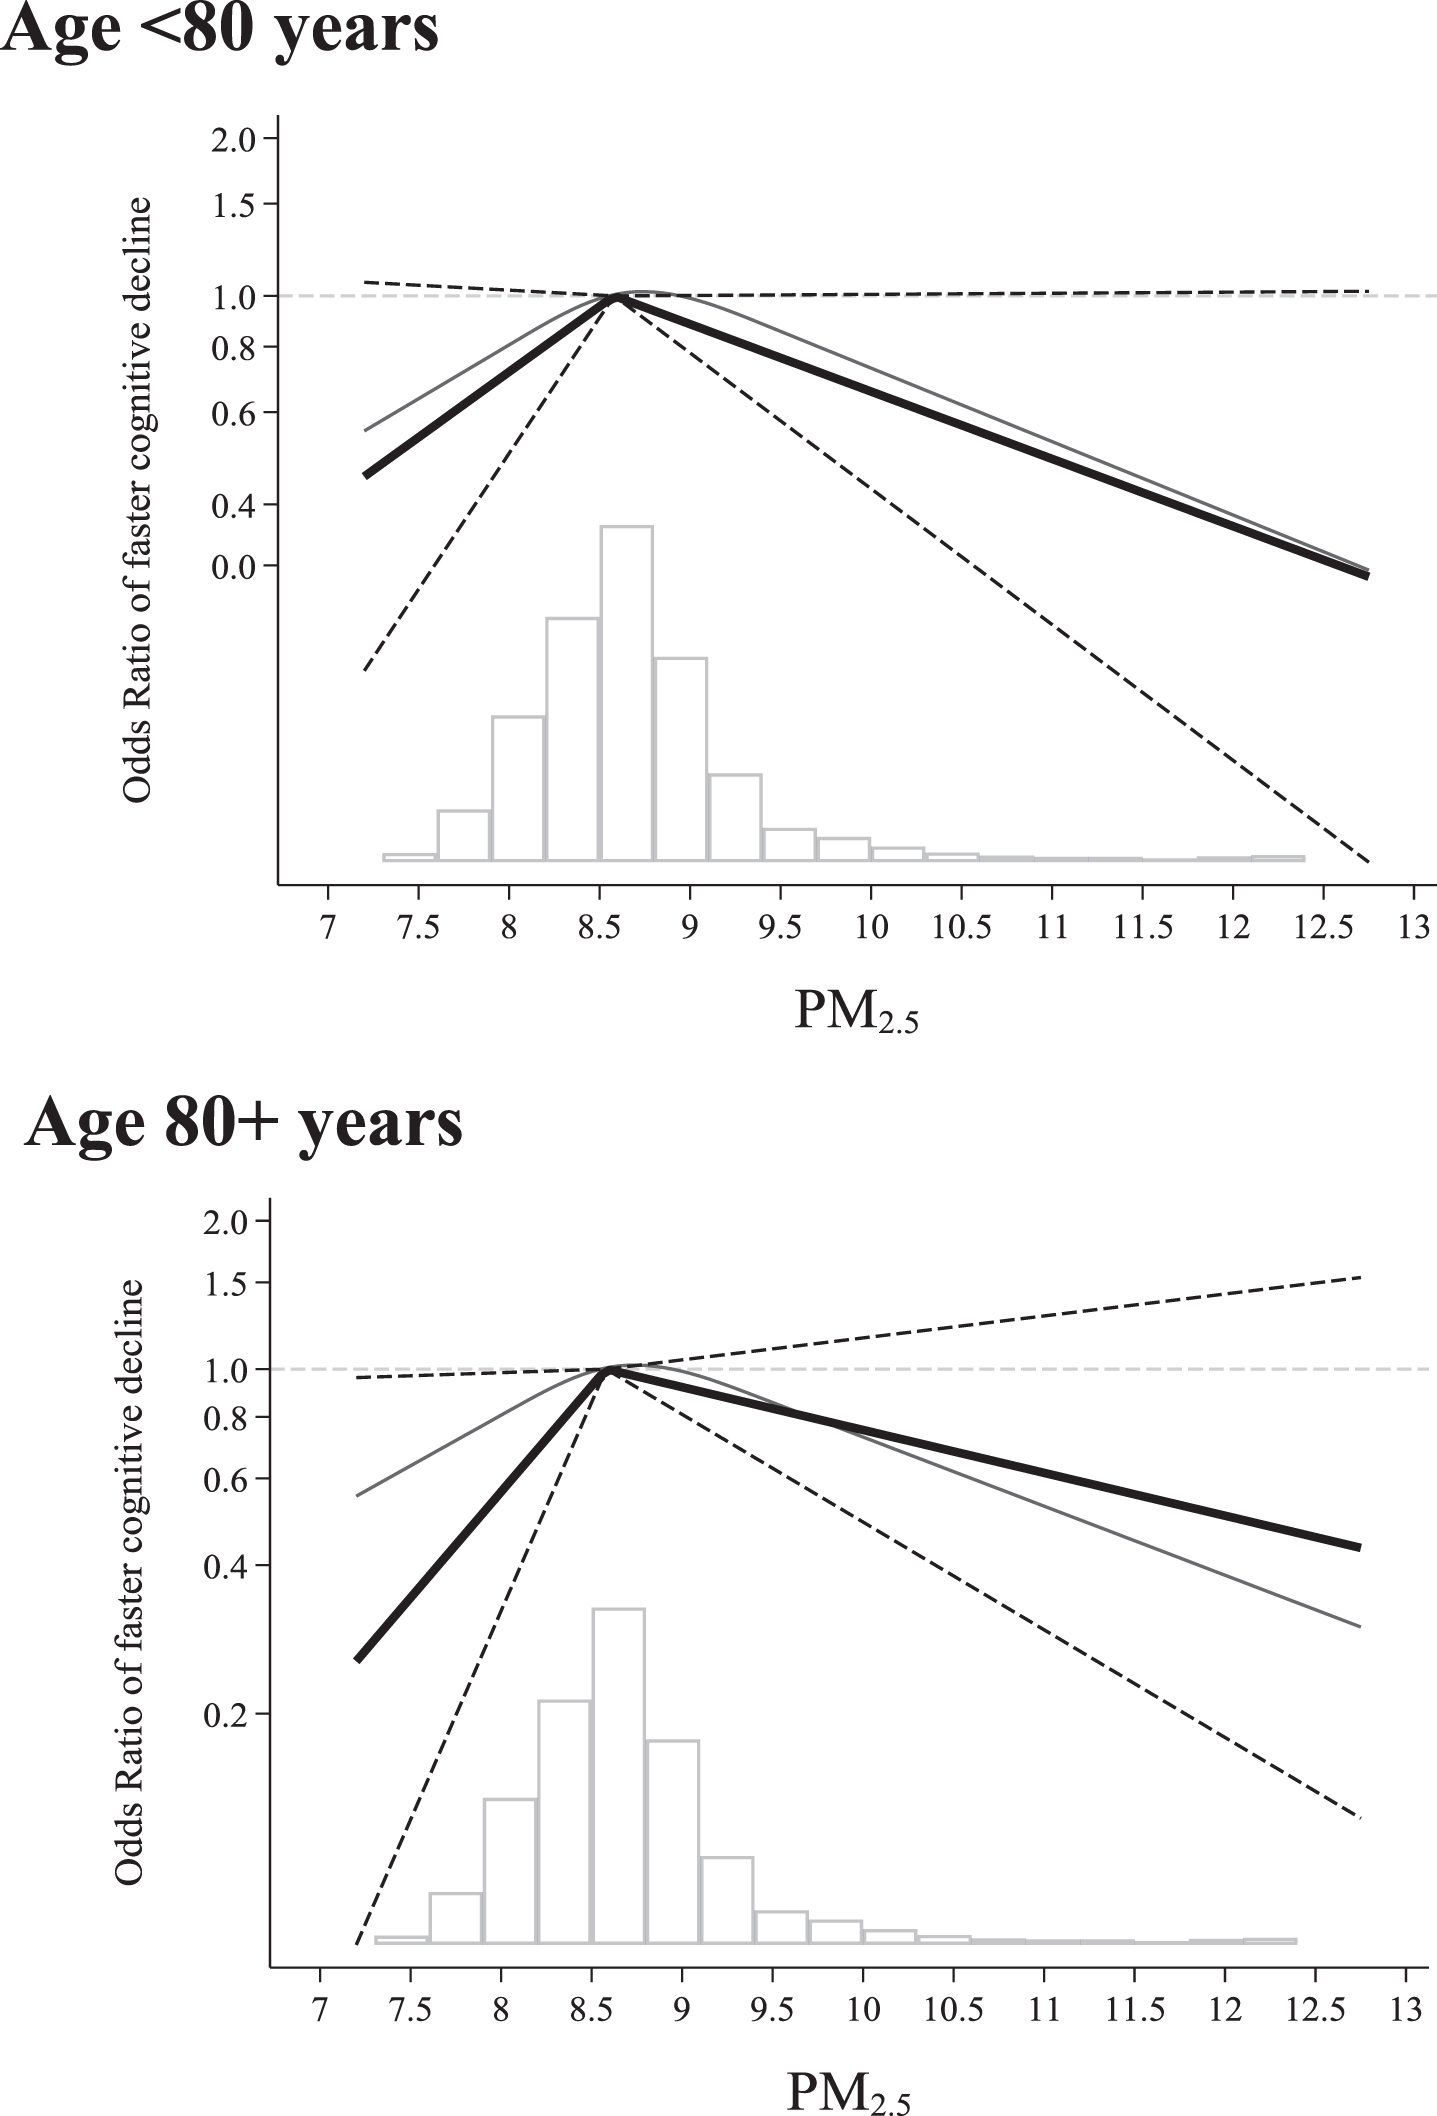 Odds Ratios (ORs) and 95%confidence interval (CI) of fast cognitive decline by levels of PM2.5 during the 10 years before baseline by age groups. Estimates are odds ratios derived from logistic regression according to PM2.5 levels. PM2.5 is modelled by using: 1) restricted cubic splines with three knots (blue line), 2) piecewise linear spline (solid line) with one knot set at the median level pf PM2.5(8.6μg/m3) with 95%CI (dash lines). Models are adjusted for age, sex, education, smoking, socio-economic status, early retirement, and physical activity. The time exposure period is between 0–10 years before the baseline assessment. The reference group is considered the median exposure level in the entire population. The histogram represents the distribution of the exposure levels in the entire population.